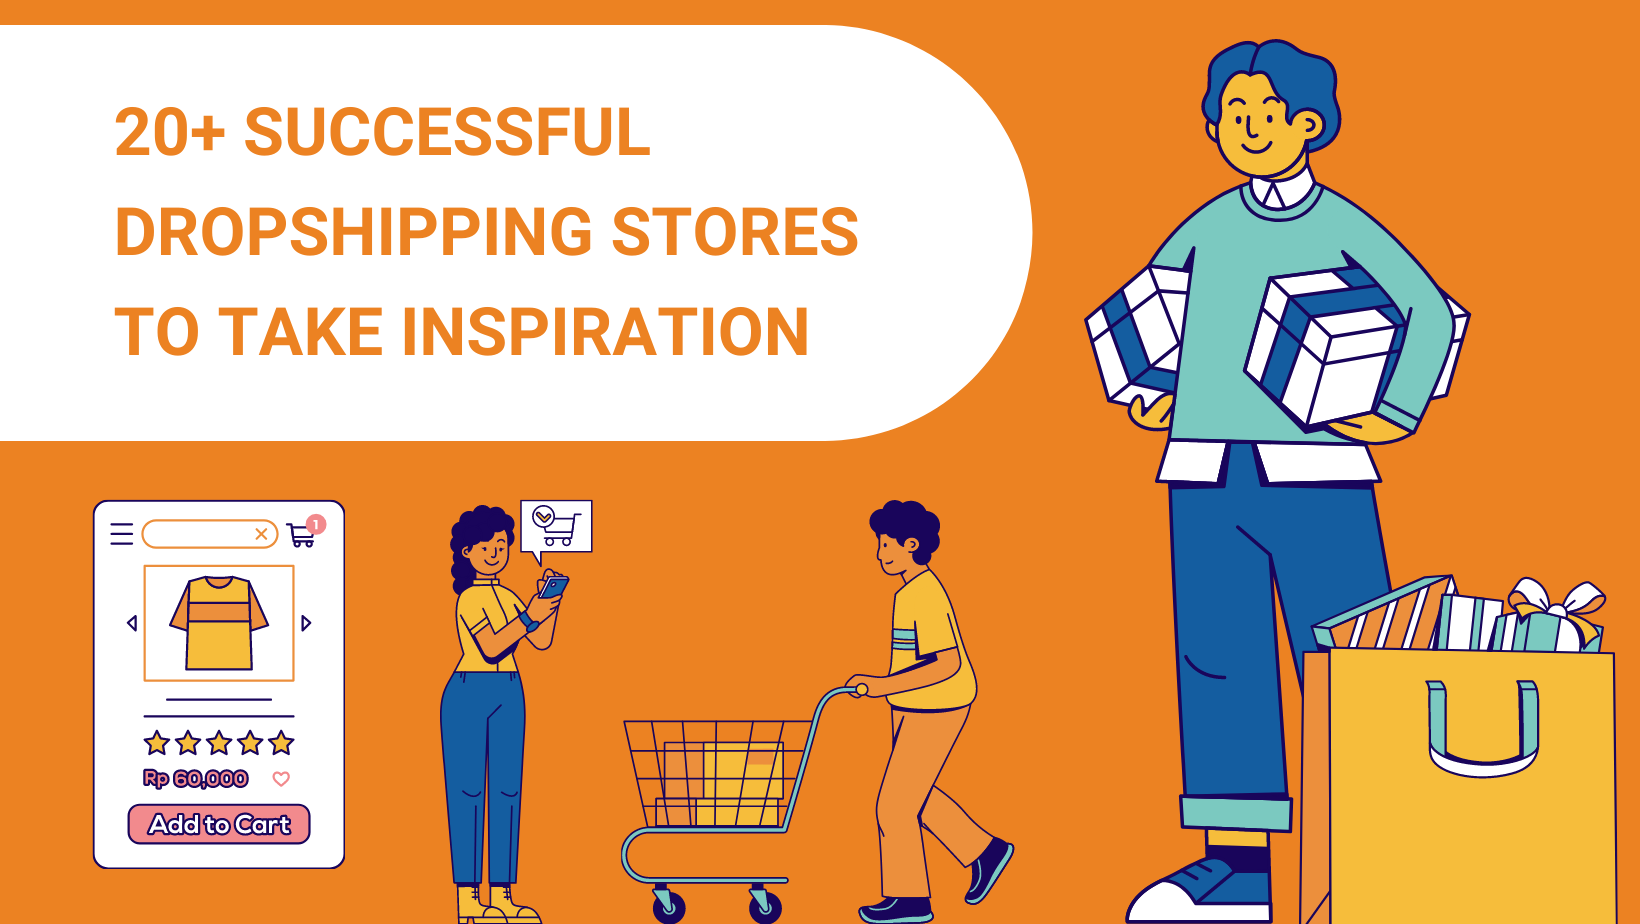 20+ SUCCESSFUL DROPSHIPPING STORES TO TAKE INSPIRATION